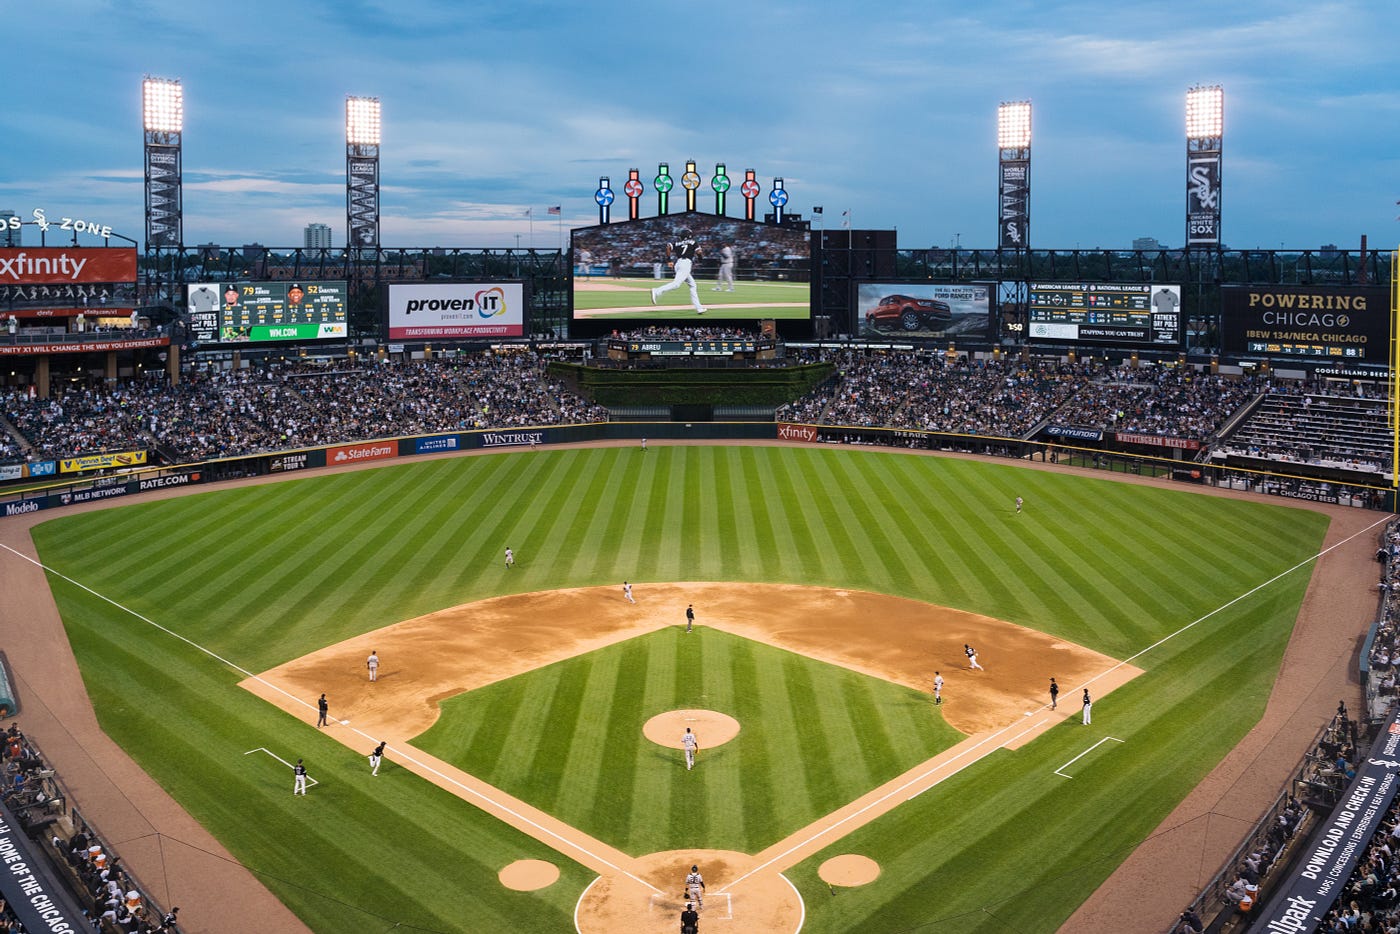 Chicago White Sox Stadium Now 'Guaranteed Rate Field